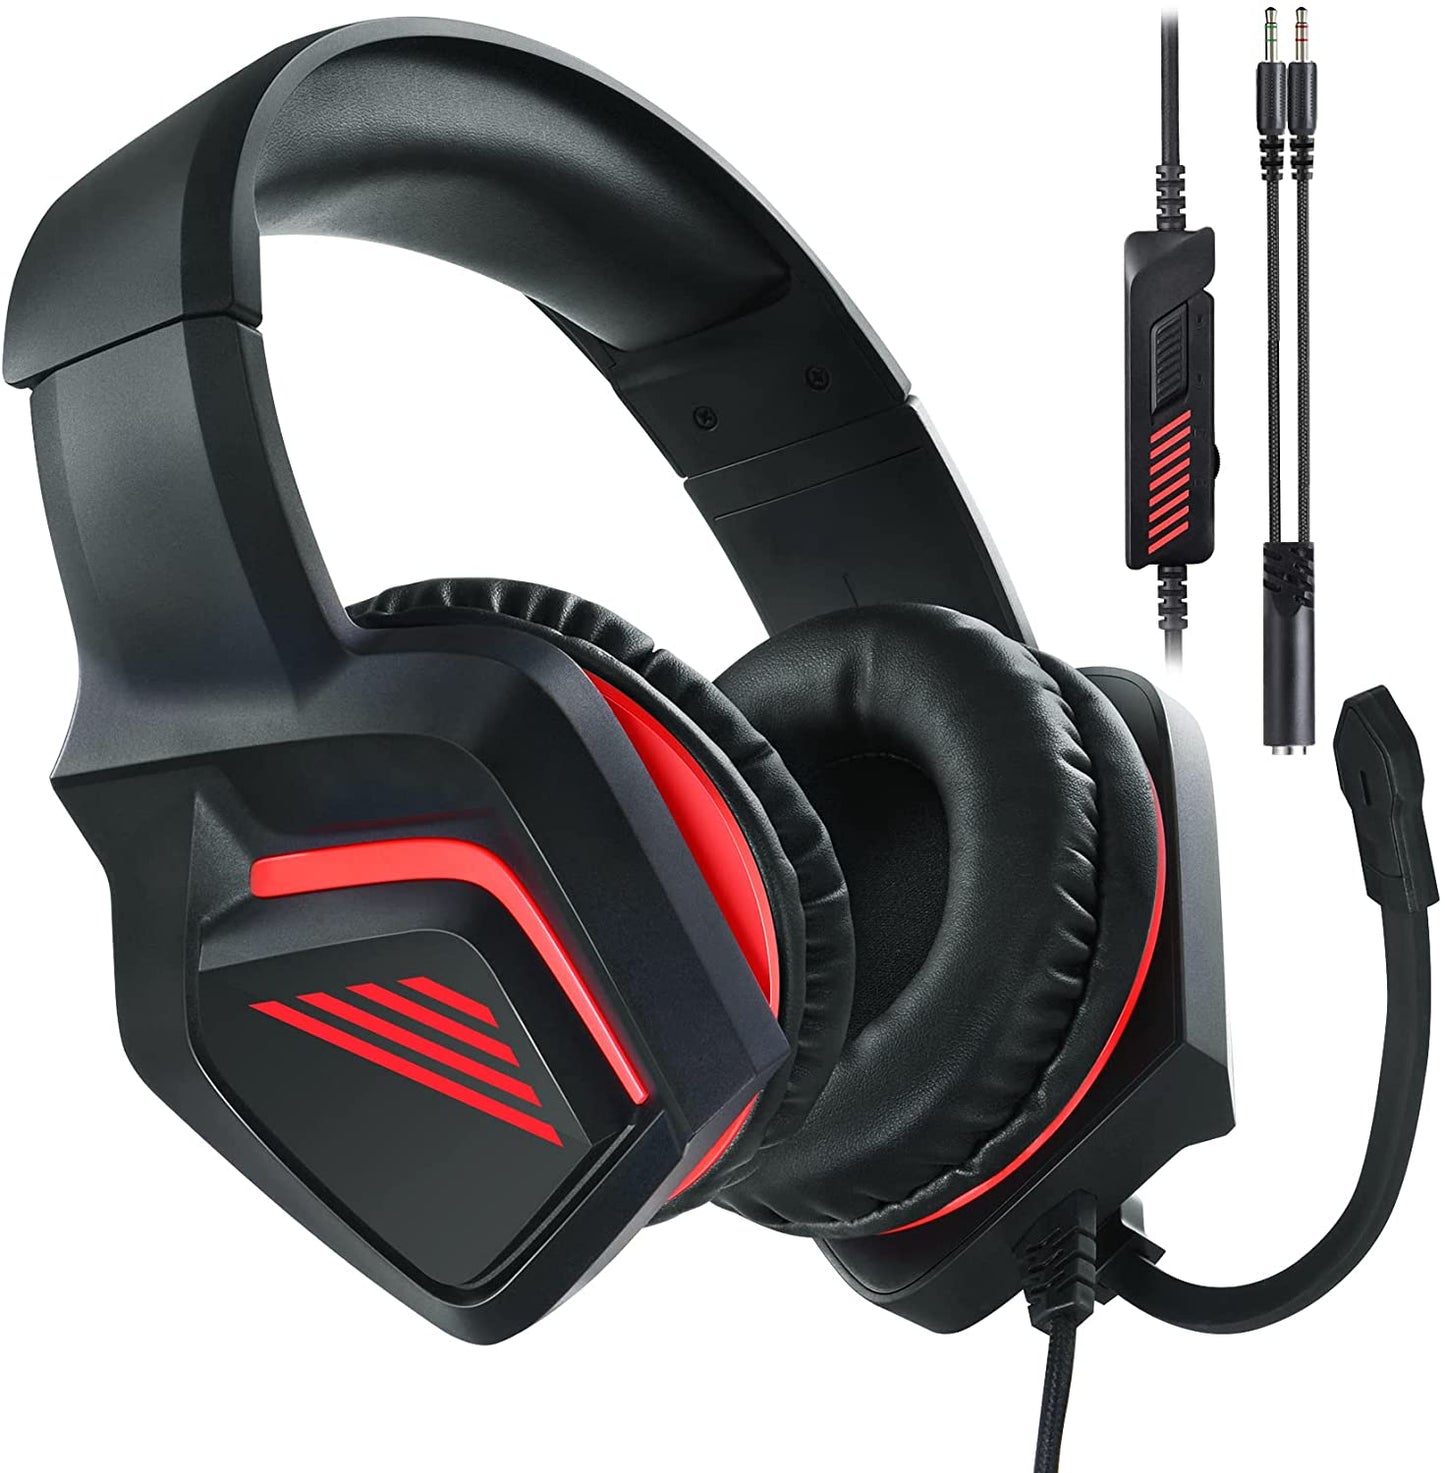 Gaming Headset for PS4 PC Xbox One PS5 Controller, Stereo Sound Noise Cancelling over Ear Headphones with Mic, Gaming Headsets Wired for PC, PS4, PS5, Switch, Xbox One Laptop Mac Nintendo Switch